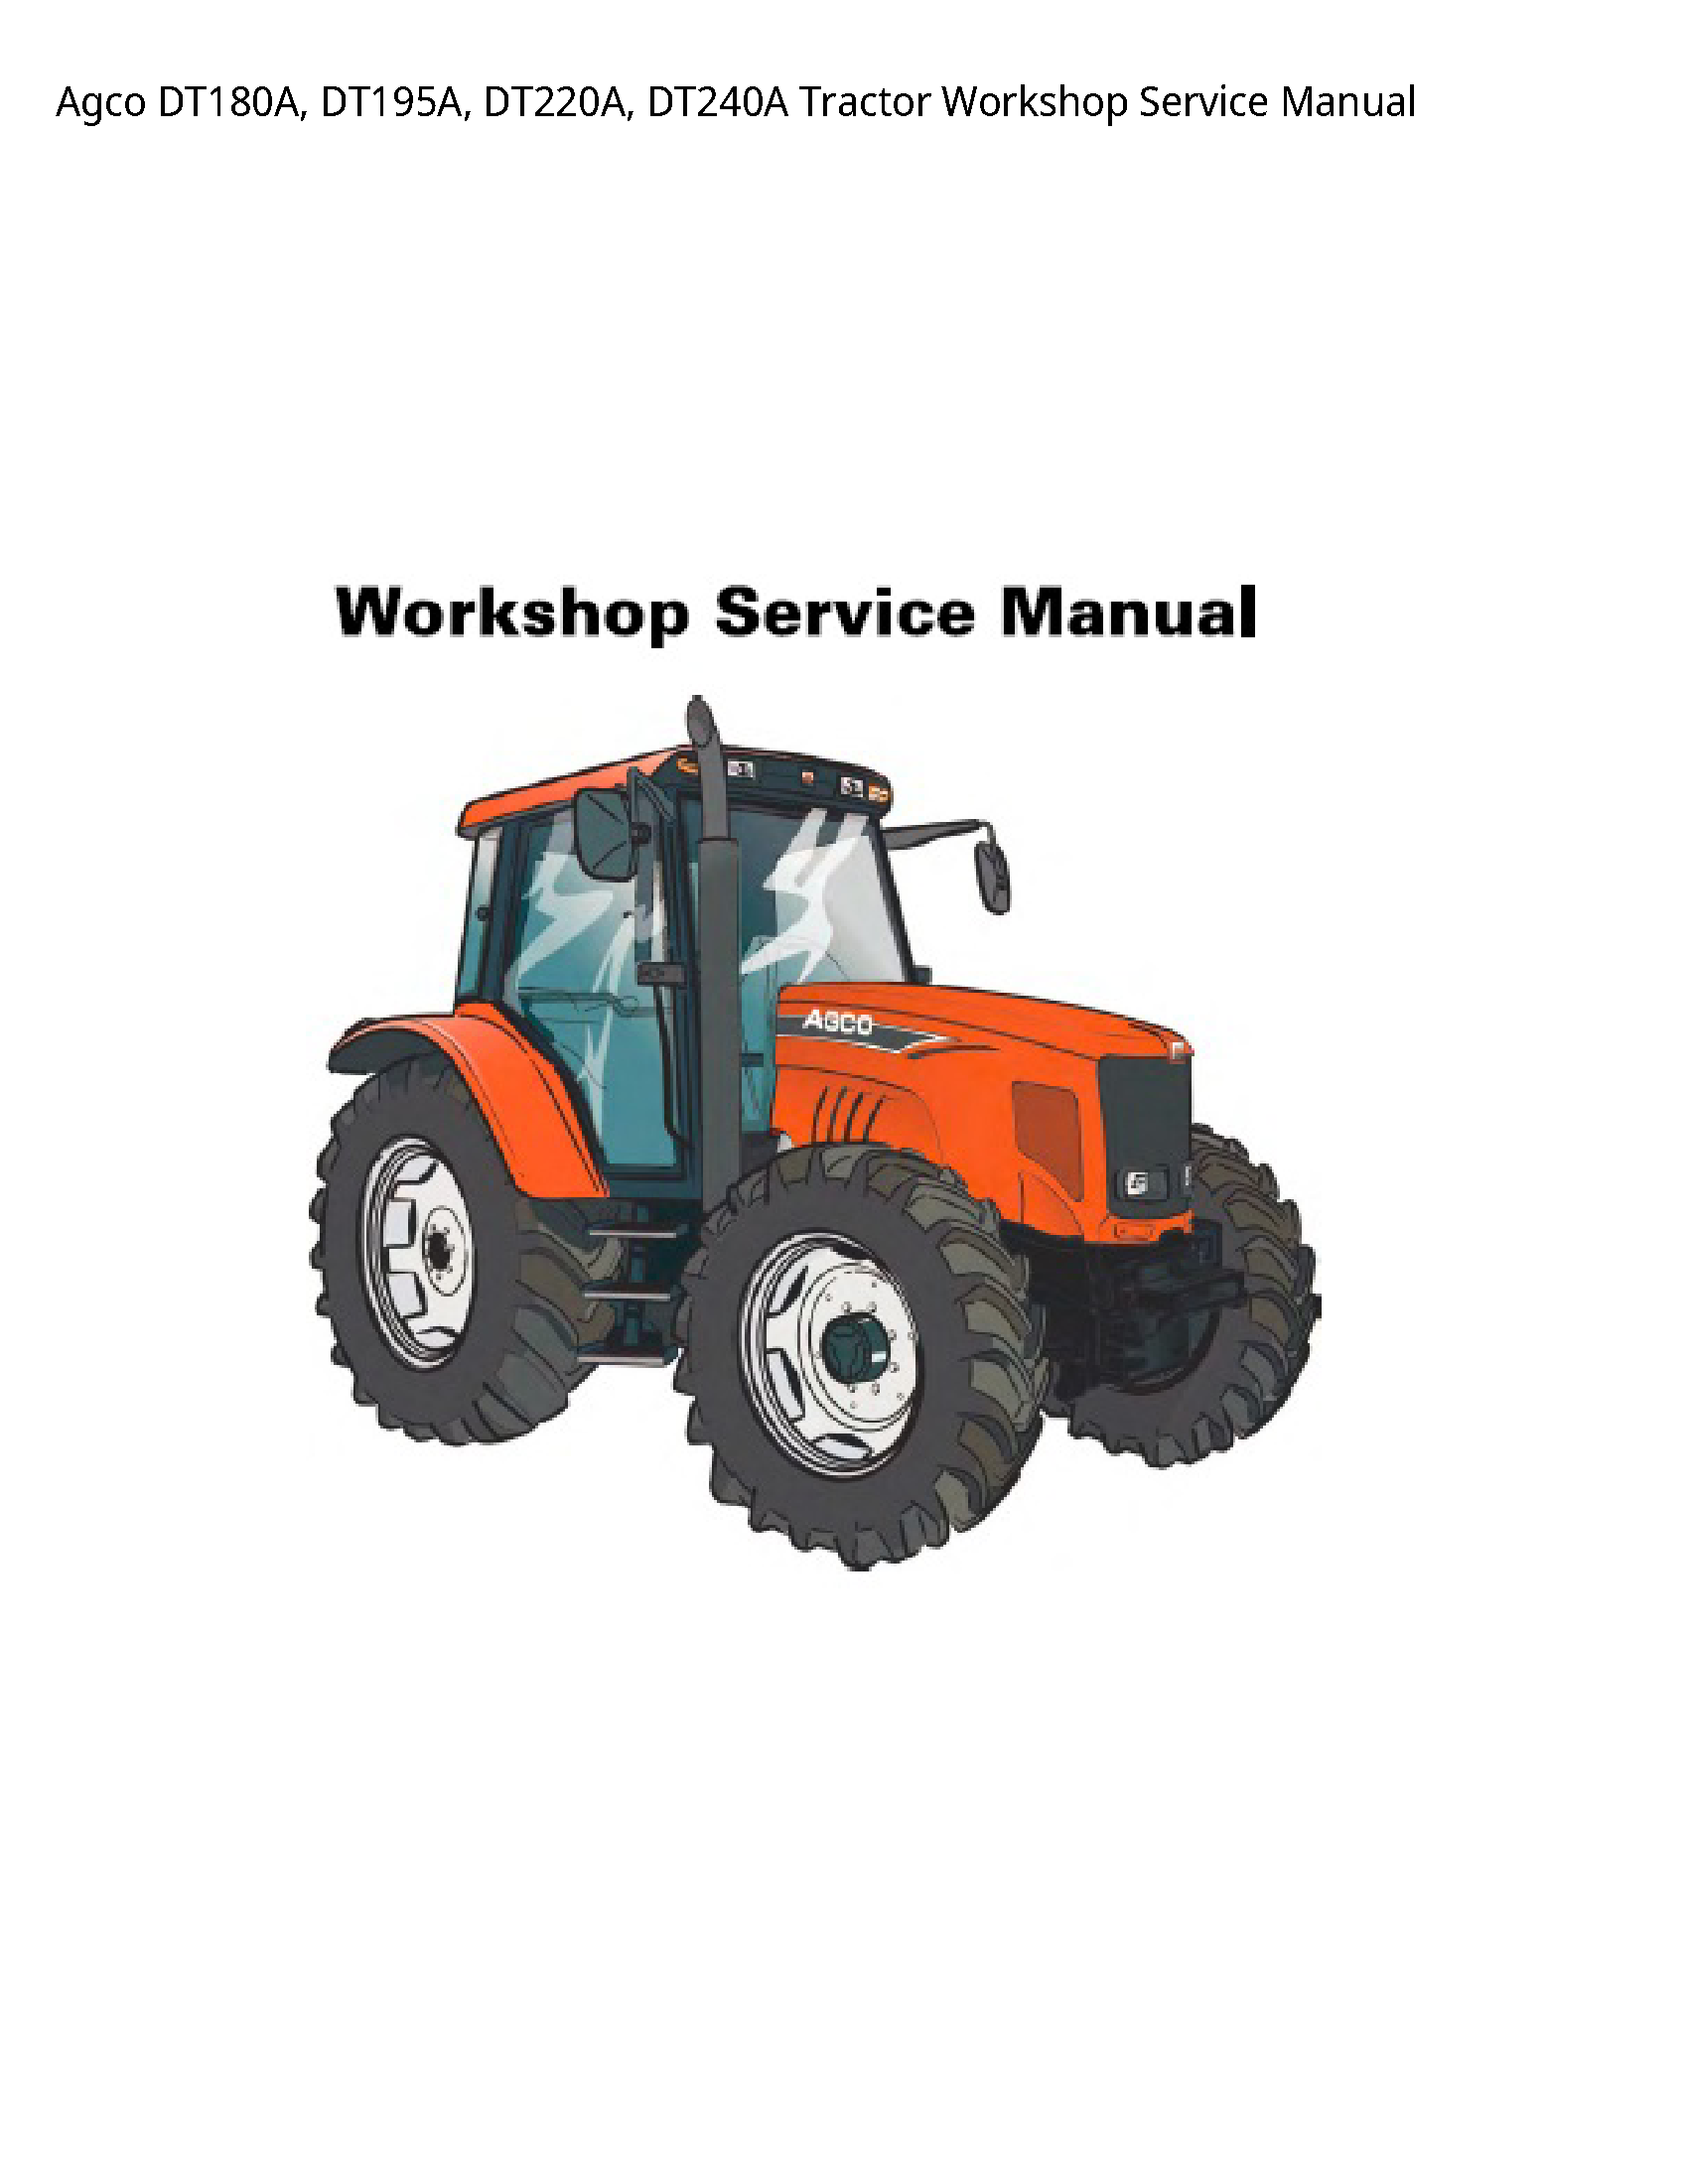 AGCO DT180A Tractor Service manual